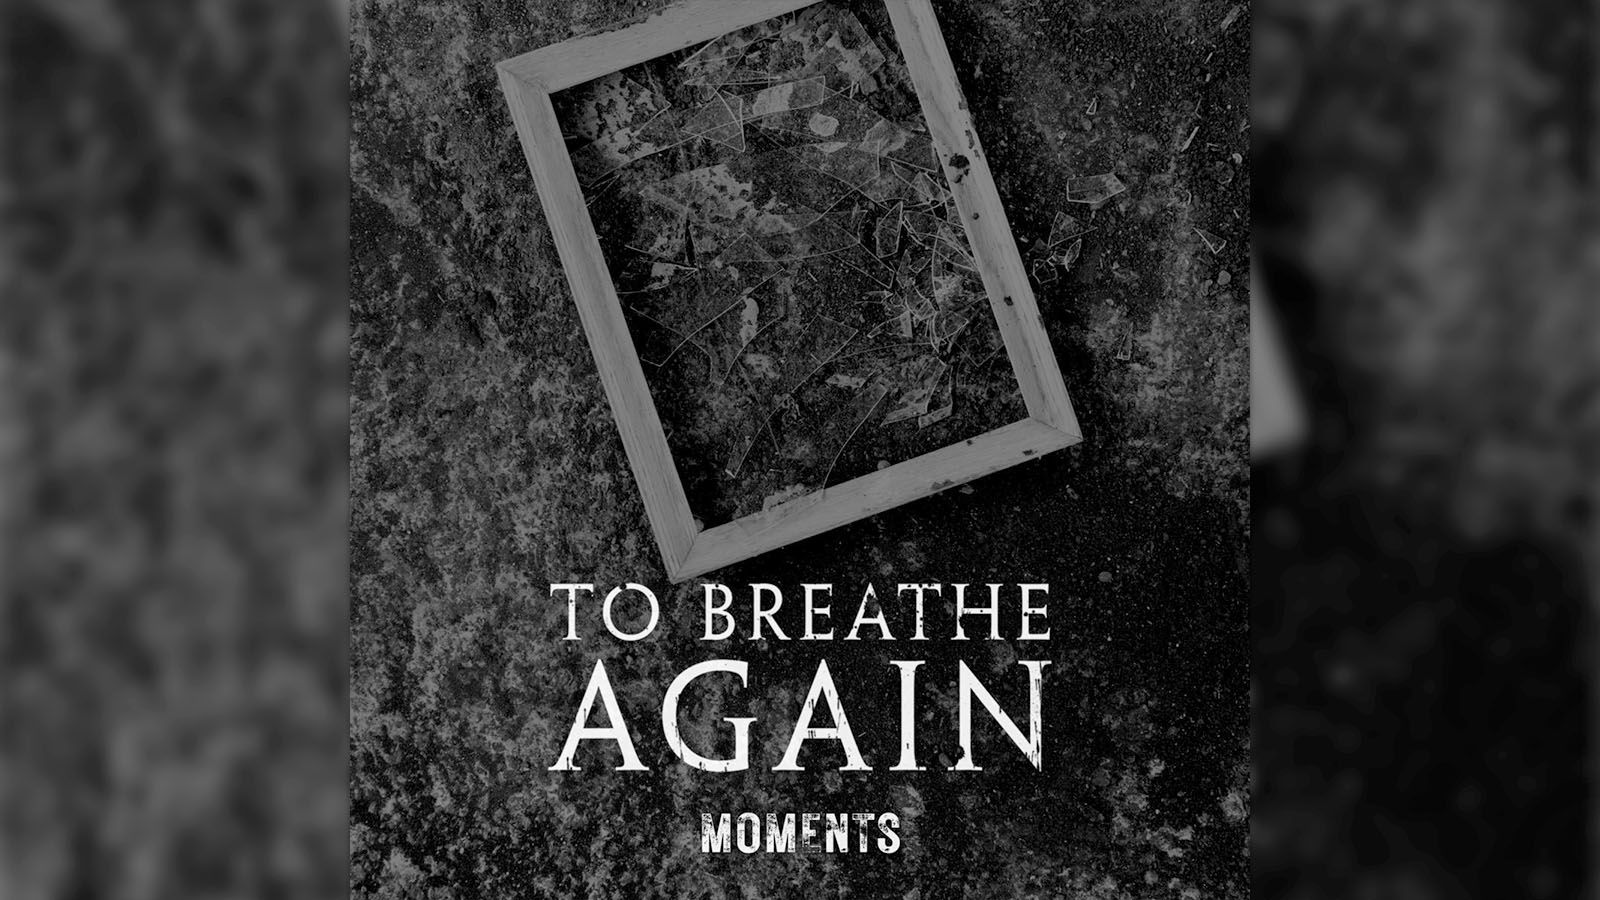 To Breathe Again are back with their new album 'Moments.'